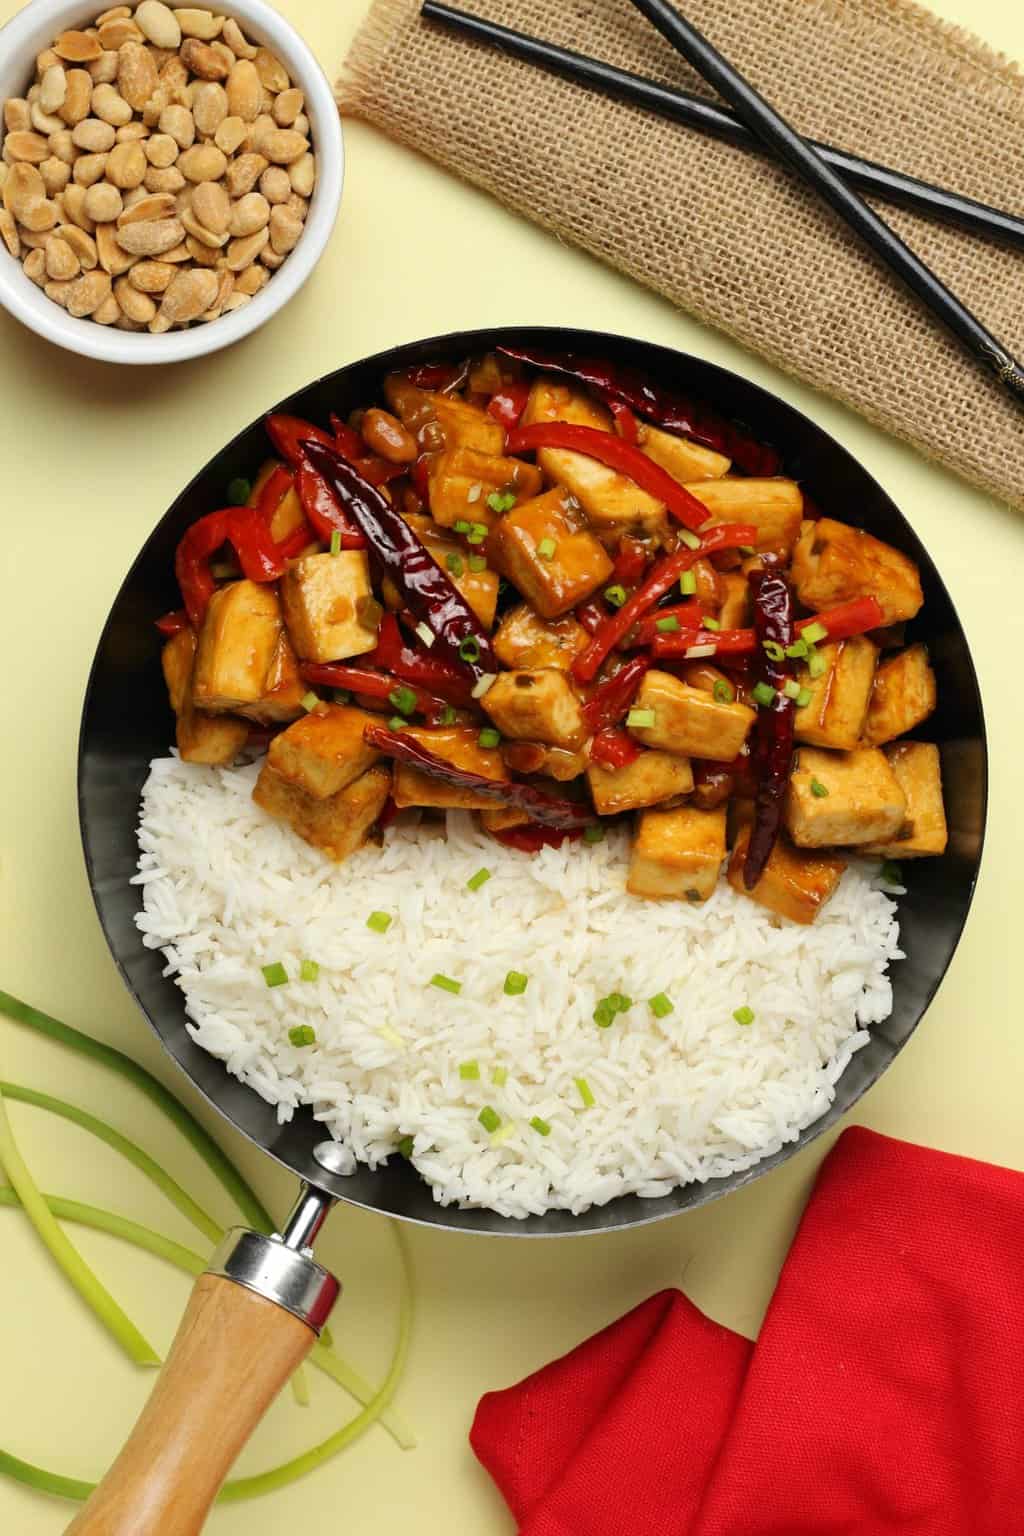 Kung pao tofu in a wok with rice and topped with chopped spring onions.